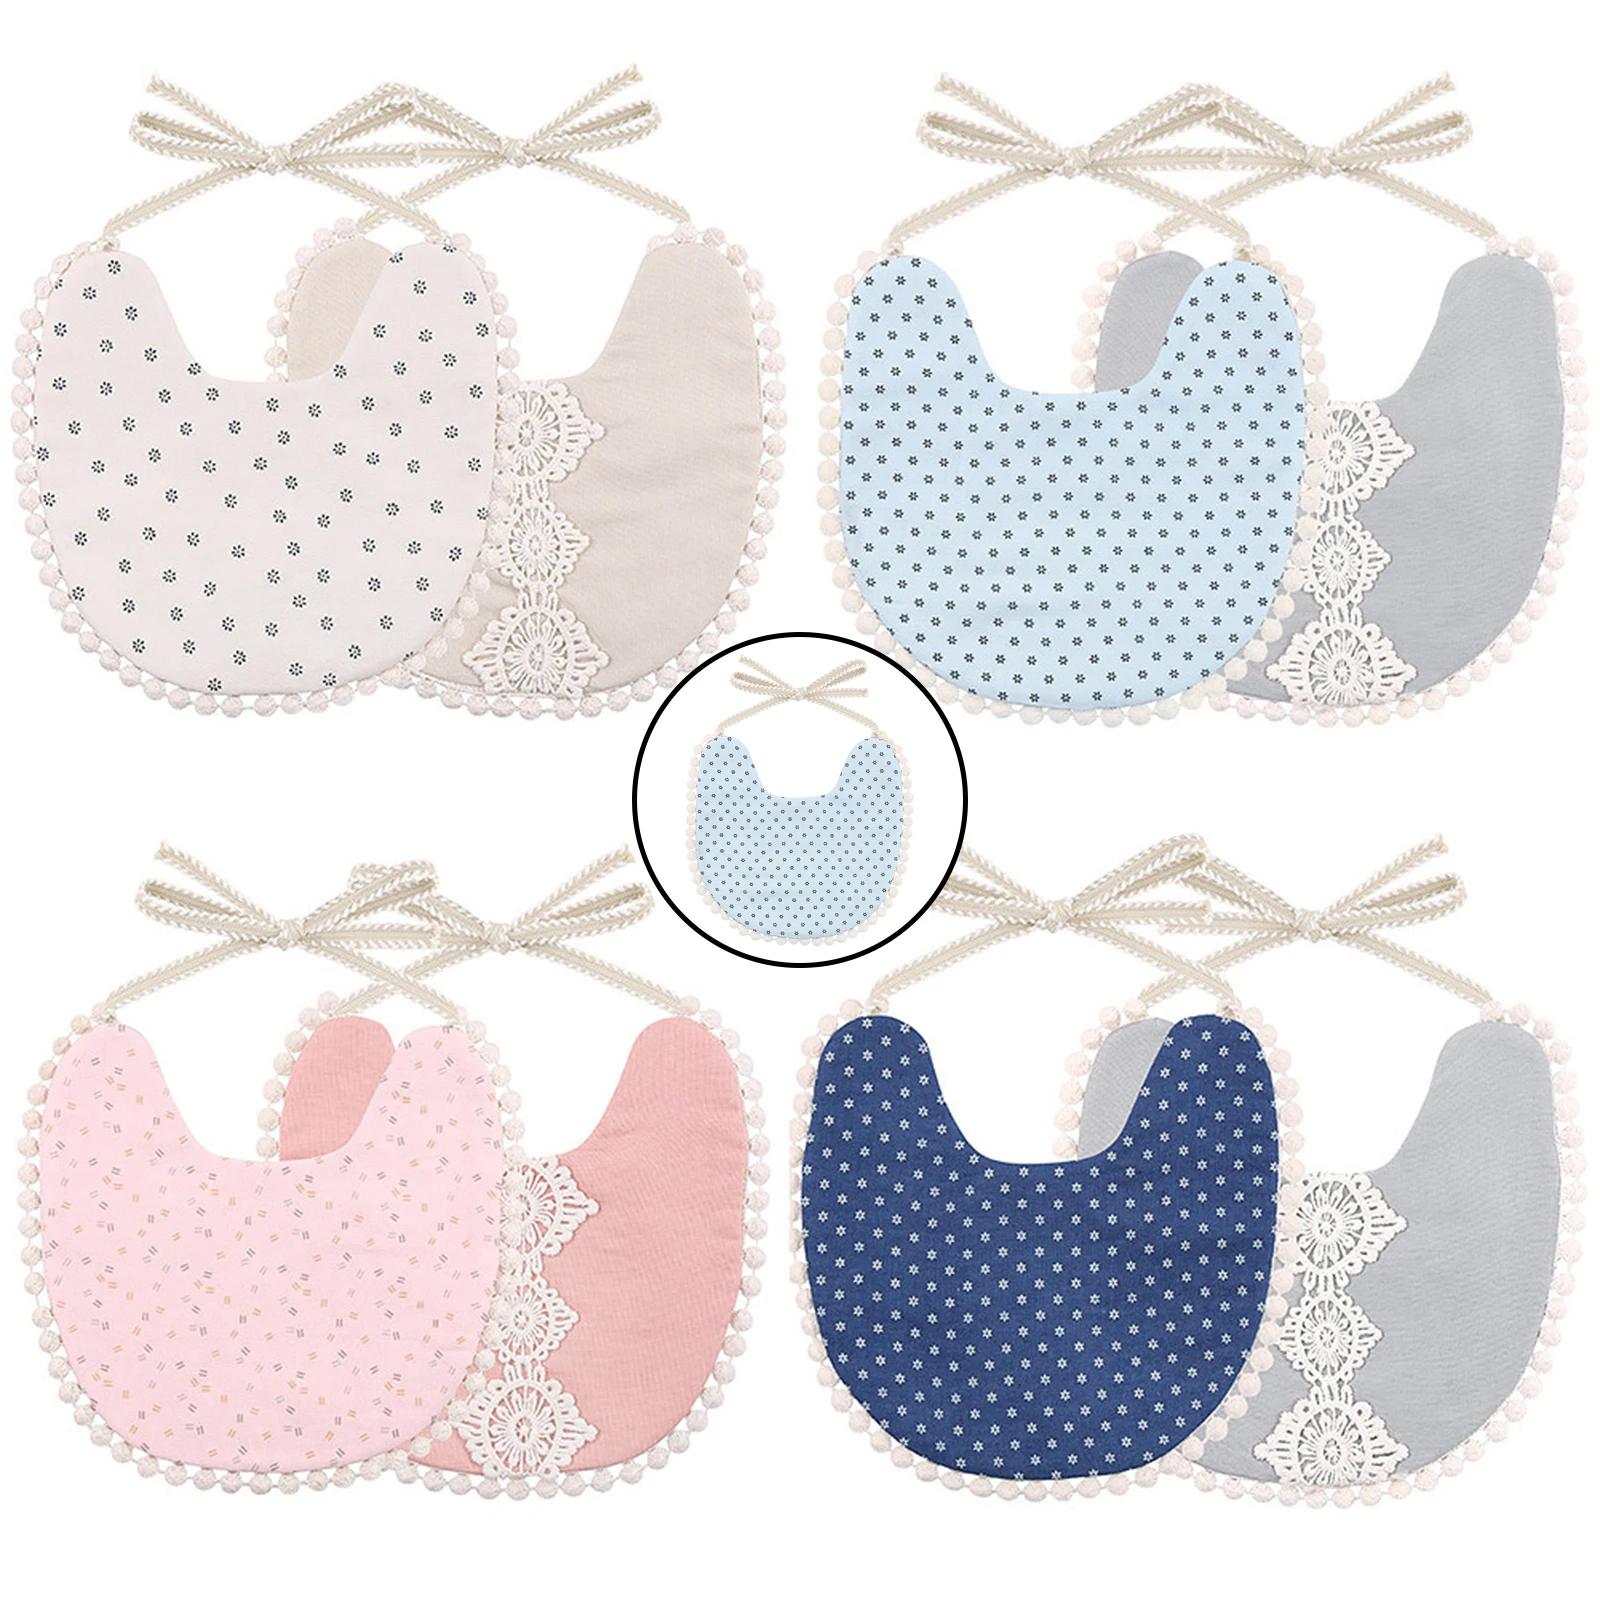 Adjustable Breathable Baby Feeding Bib Linen Cotton Drinking Teething Drooling Burp Apron Cloth Protection for Toddler